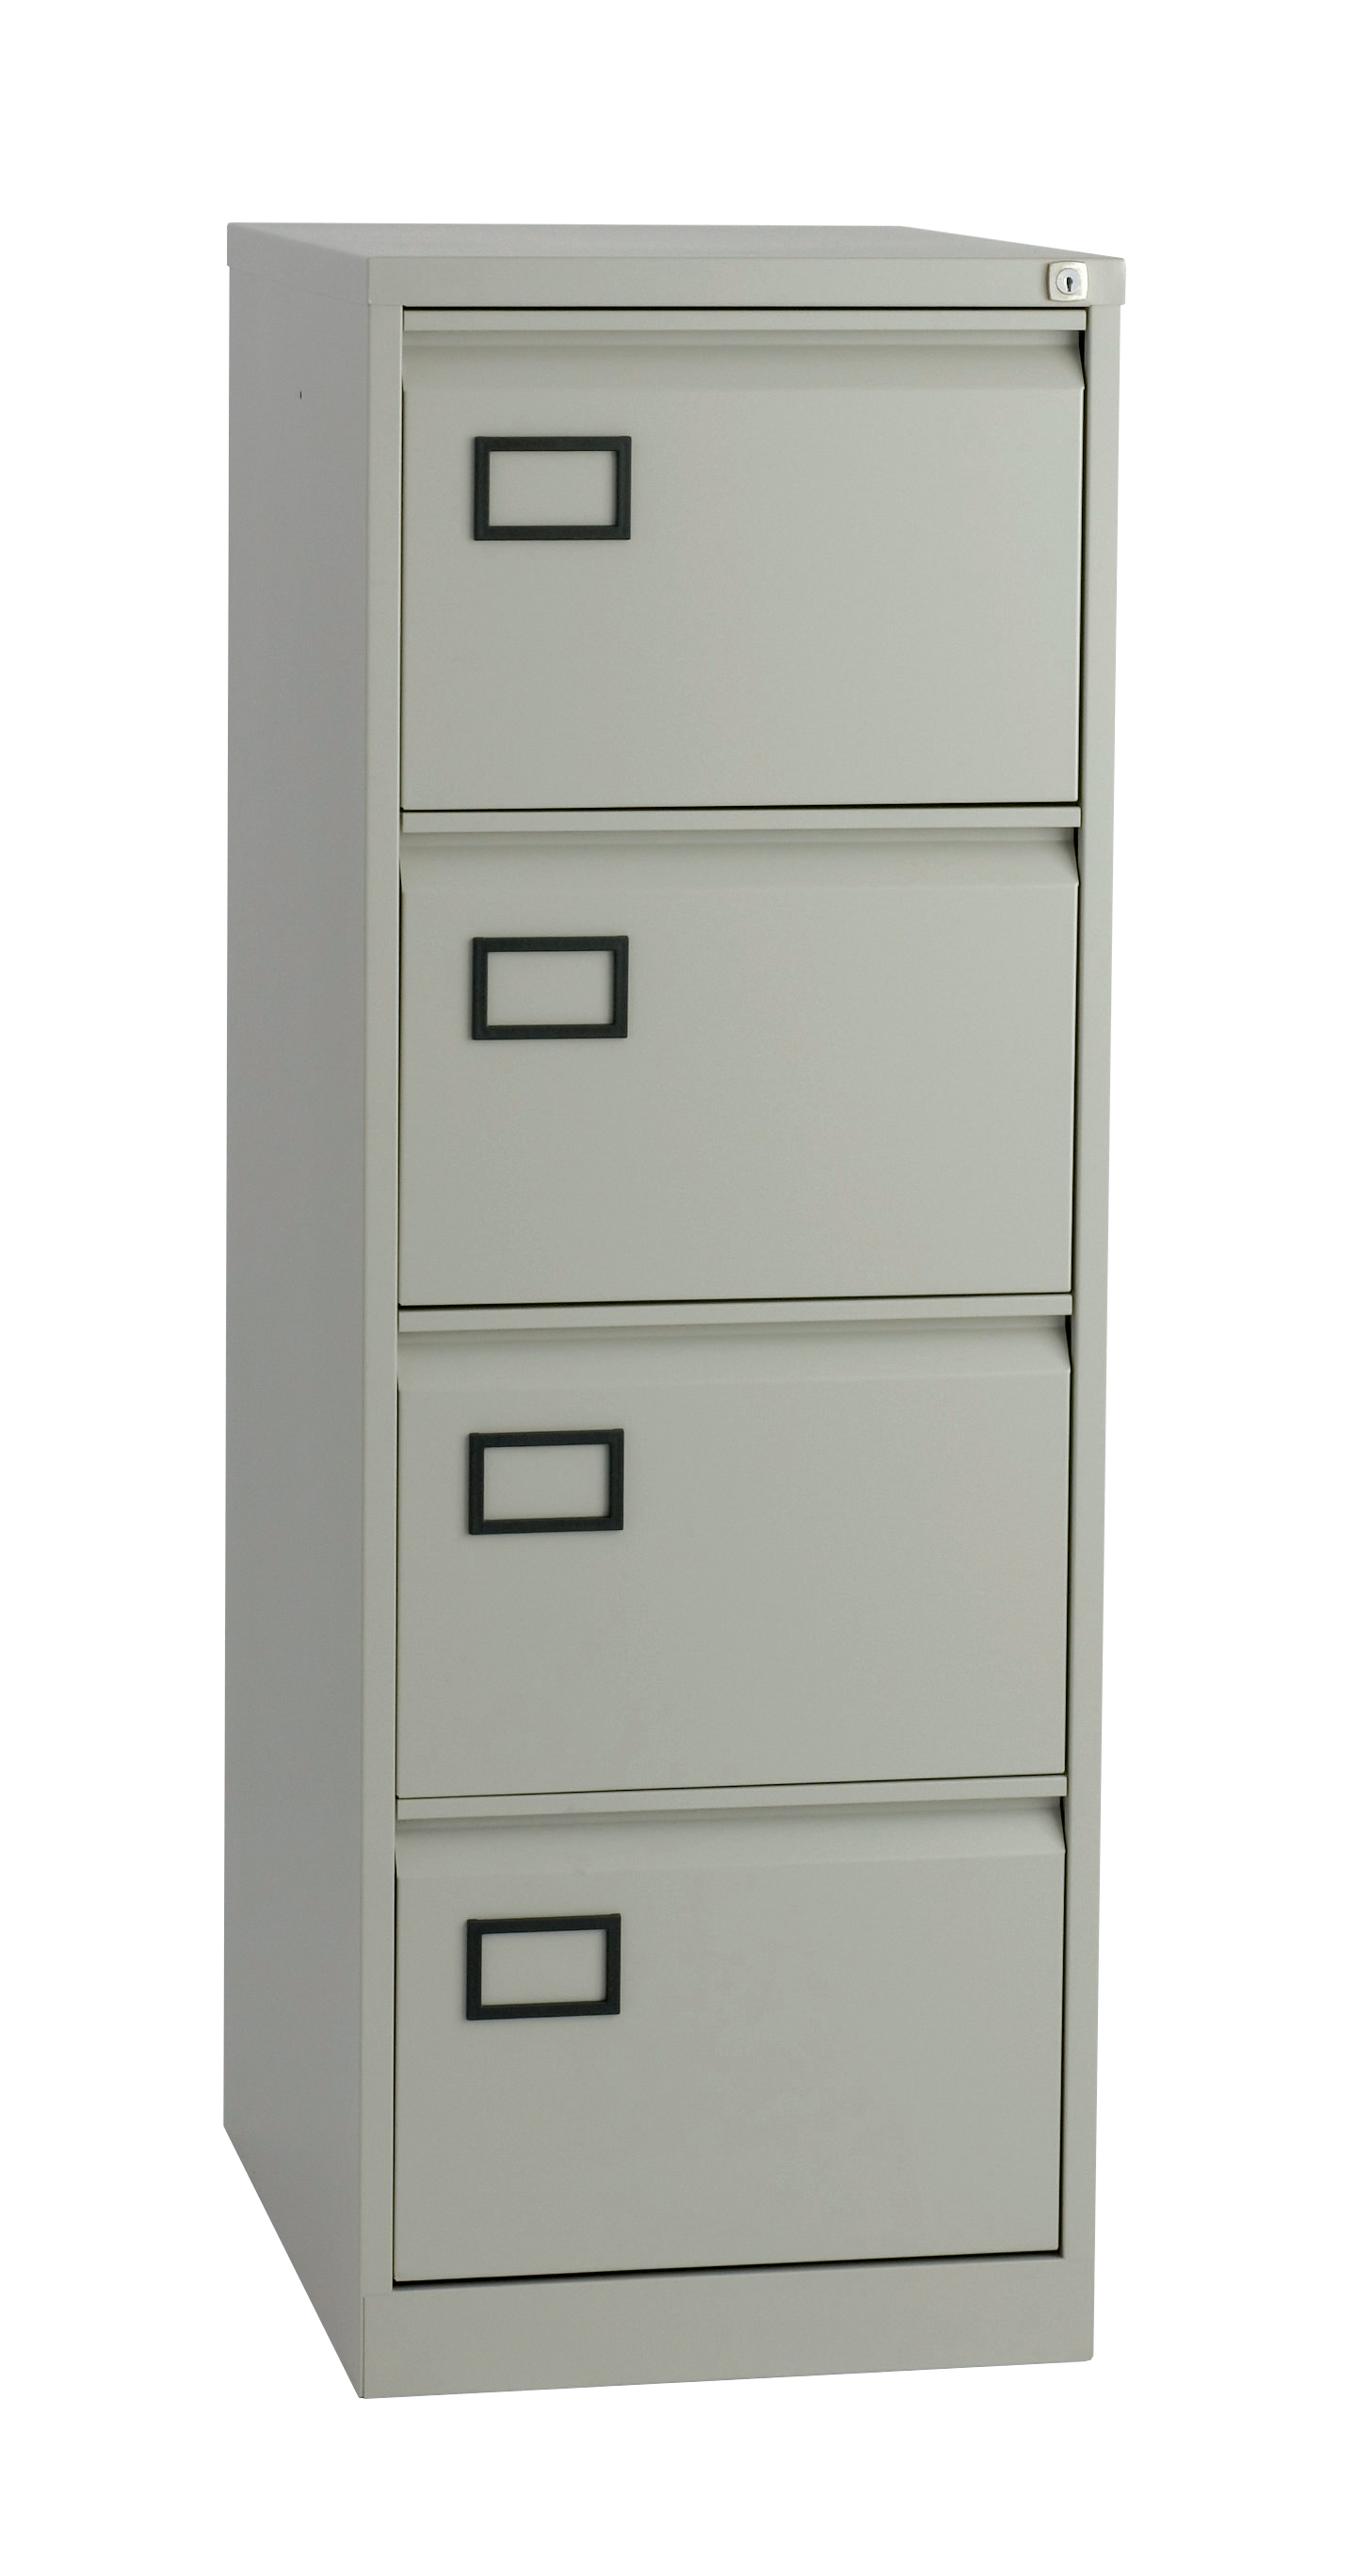 Bisley Aoc Contract Filing Cabinet 4 Drawer Aoc4 Bisley In in dimensions 1456 X 2736